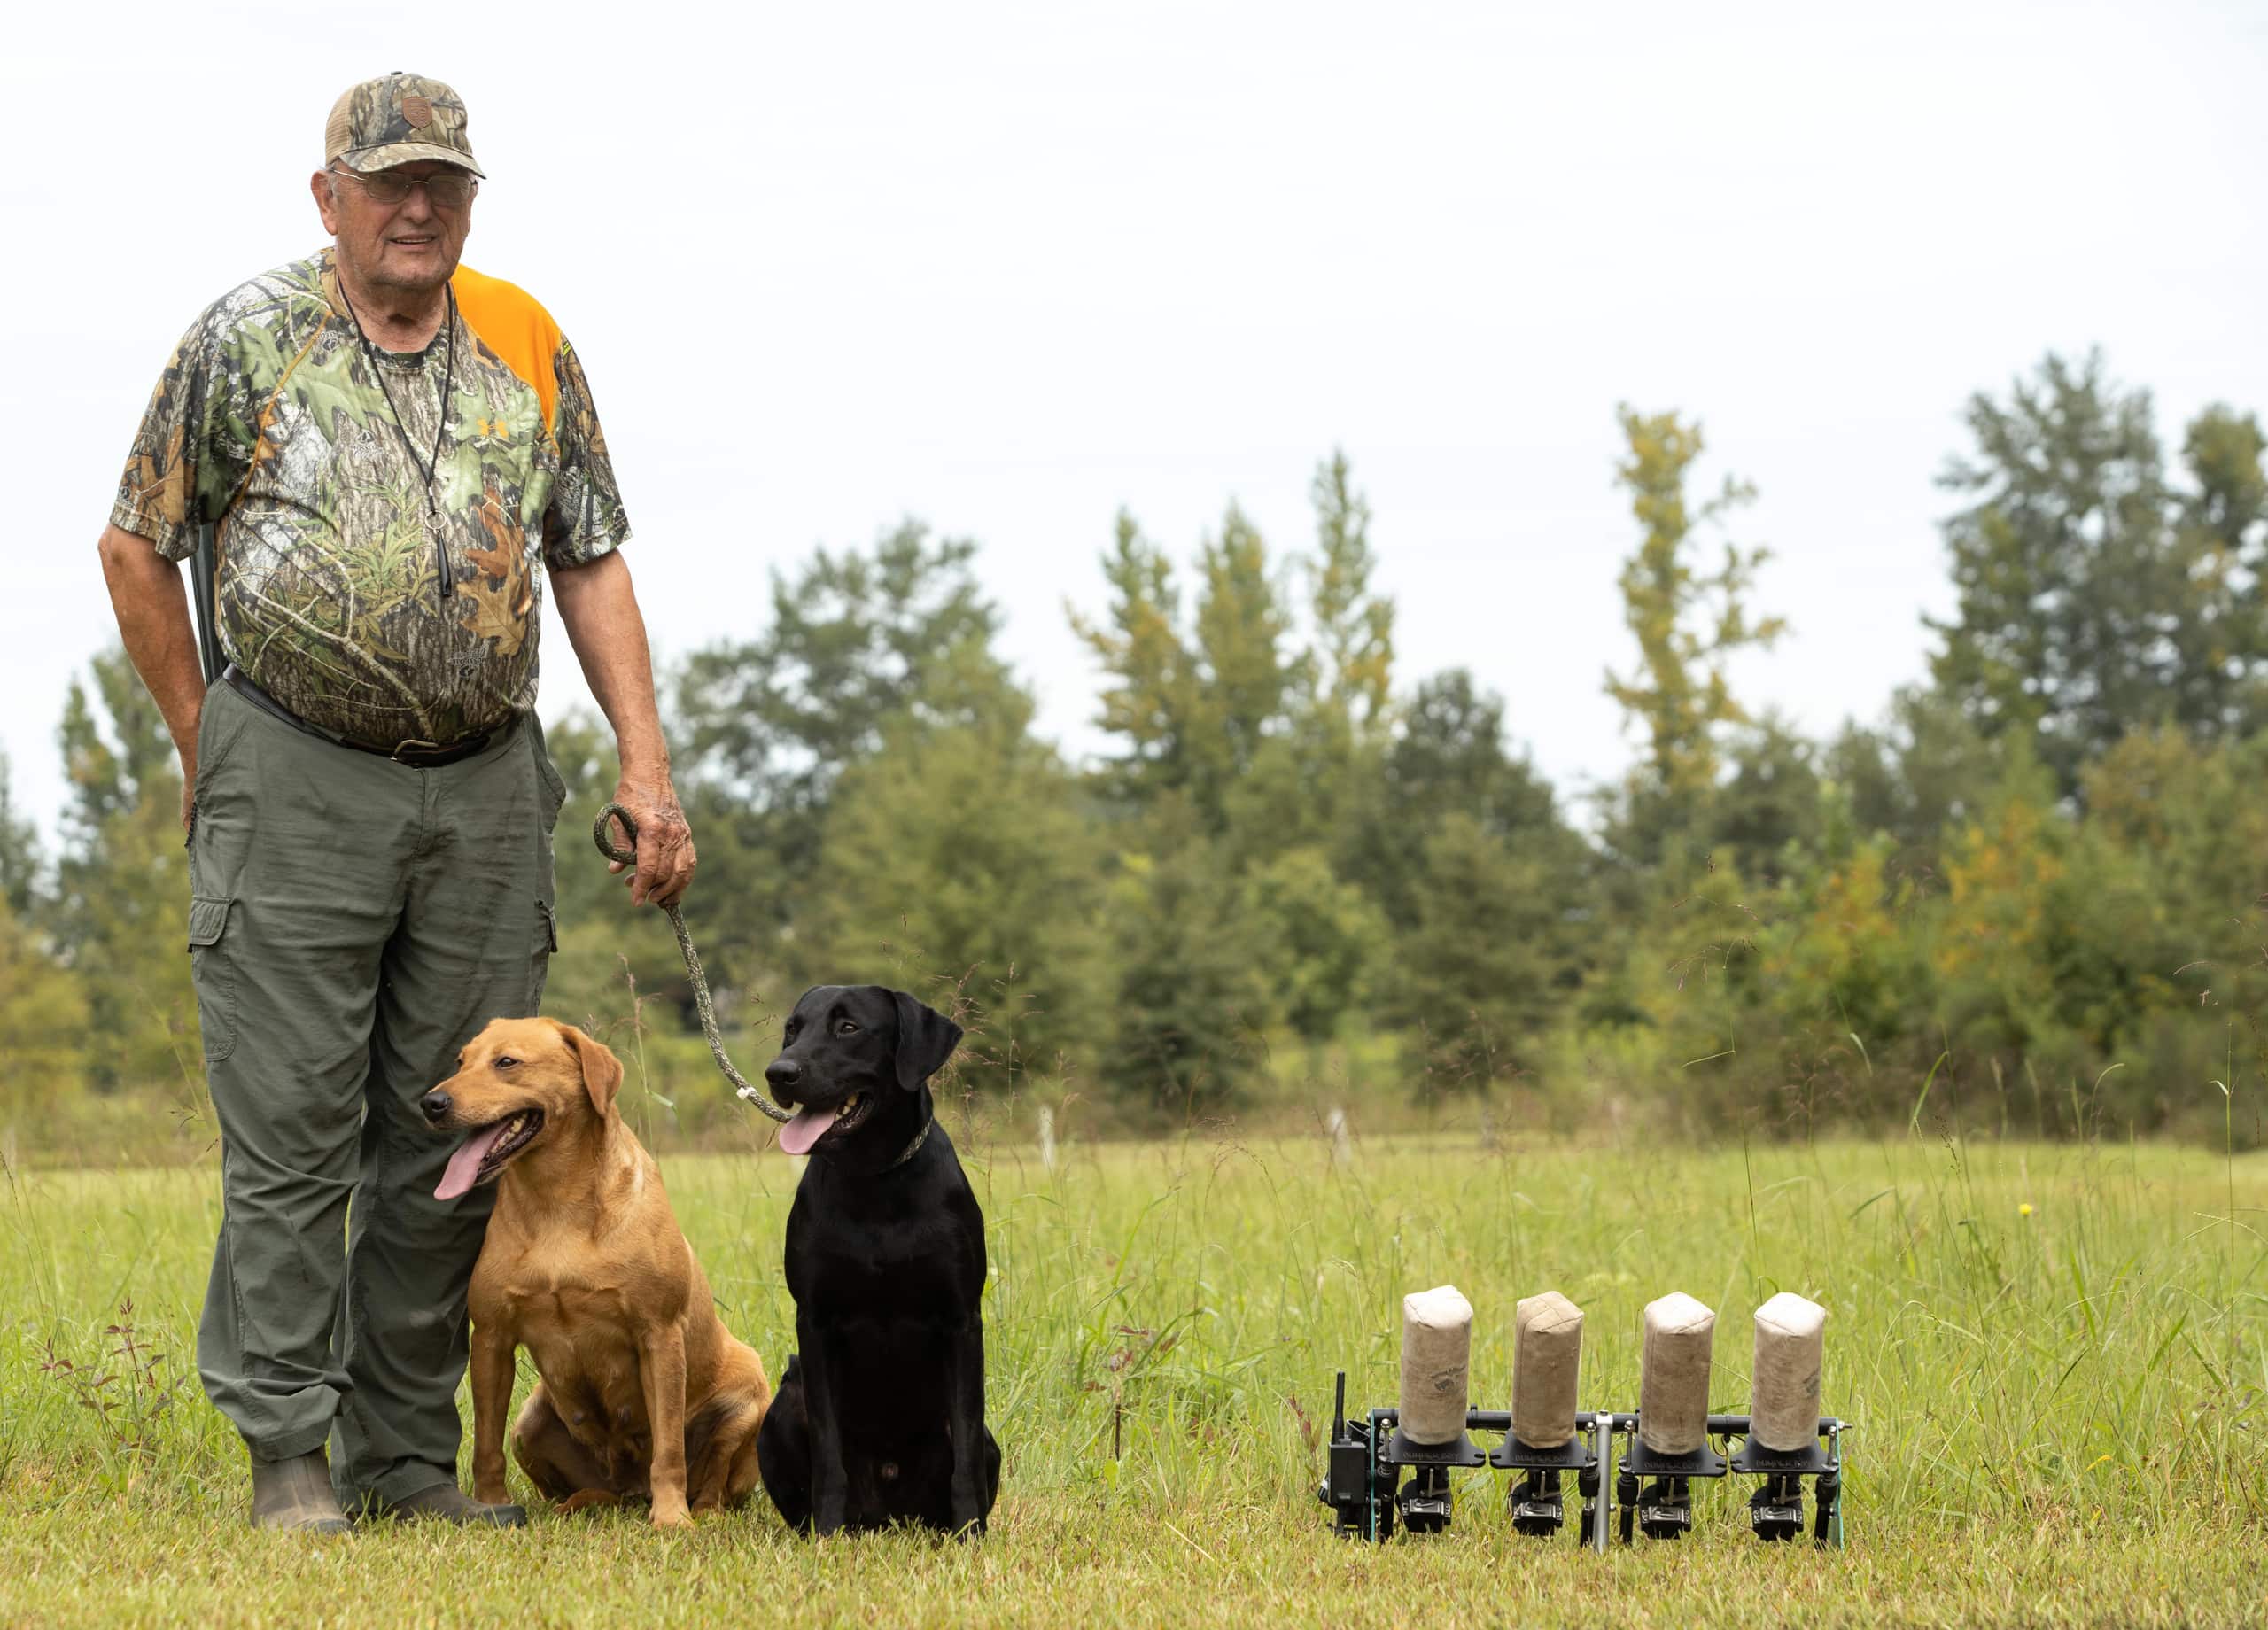 5 Training Tools for Your Hunting Dog